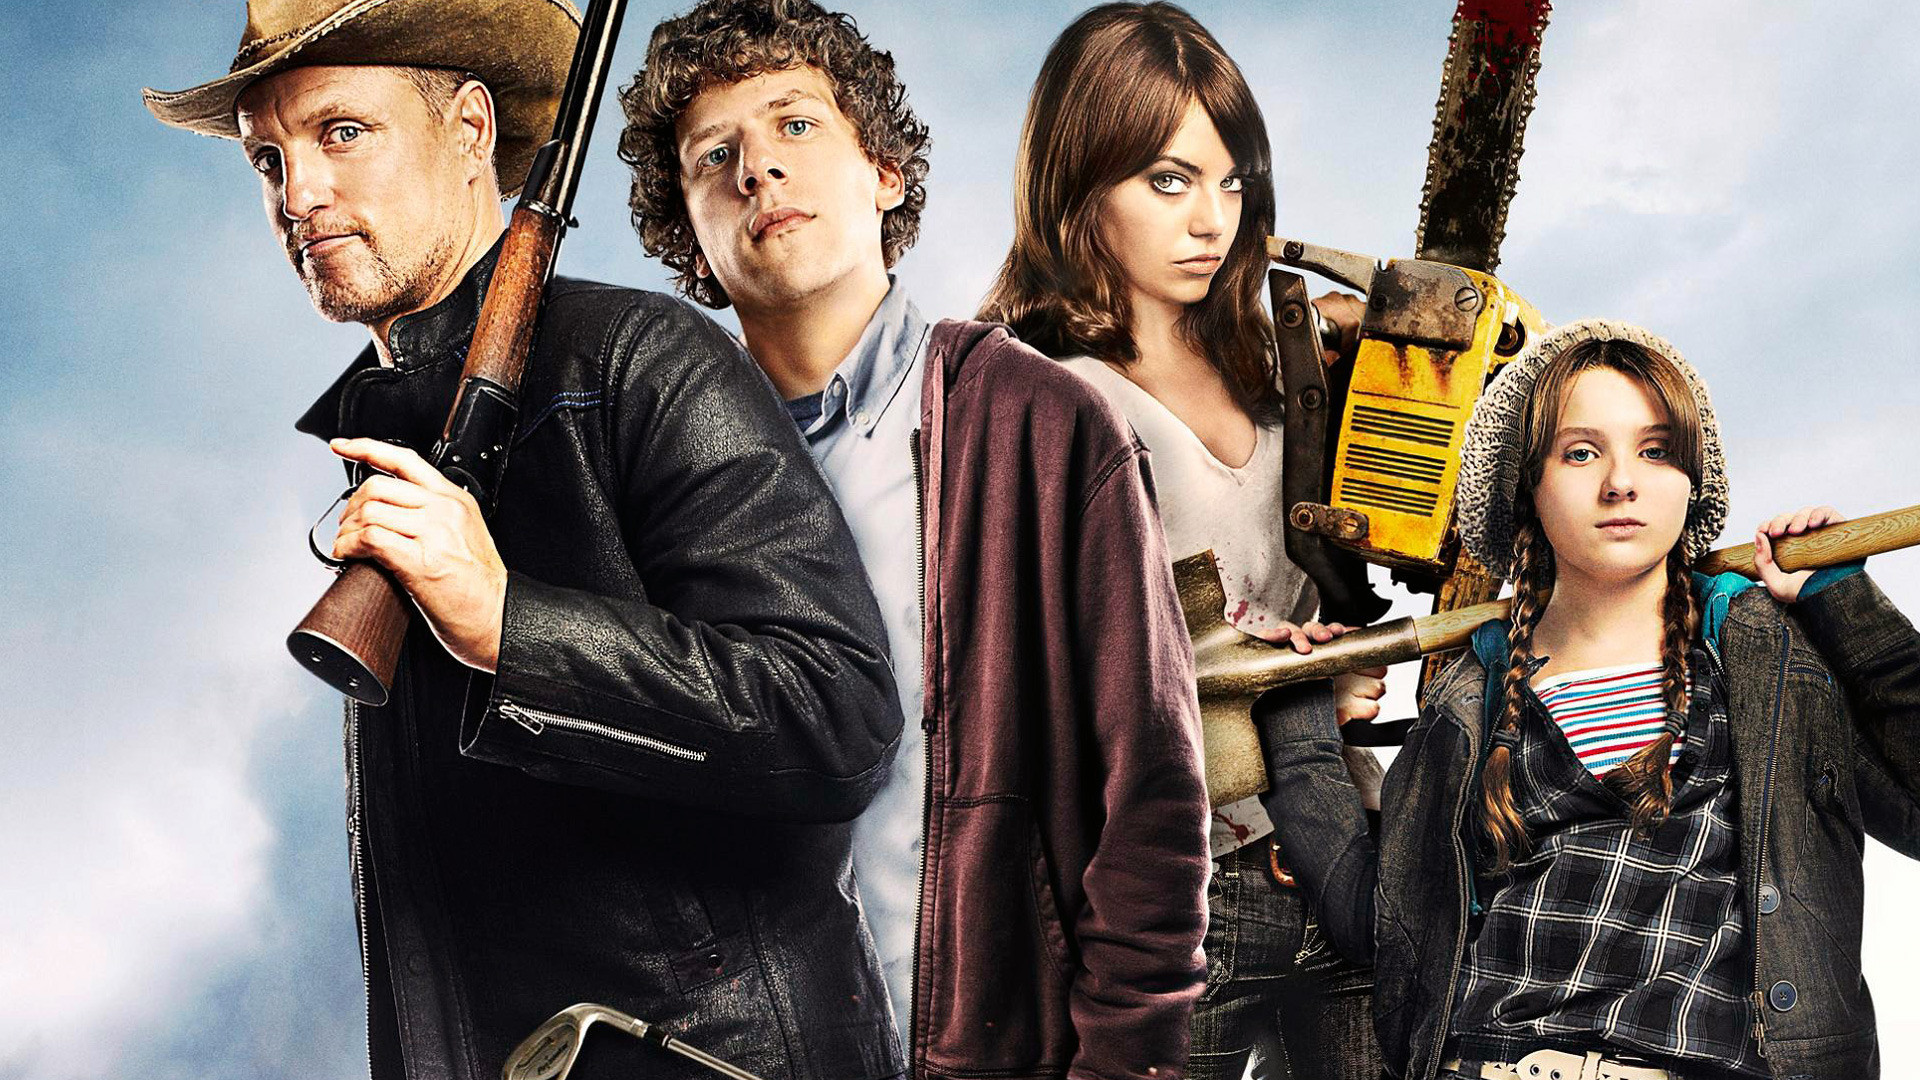 20+ Zombieland HD Wallpapers and Backgrounds